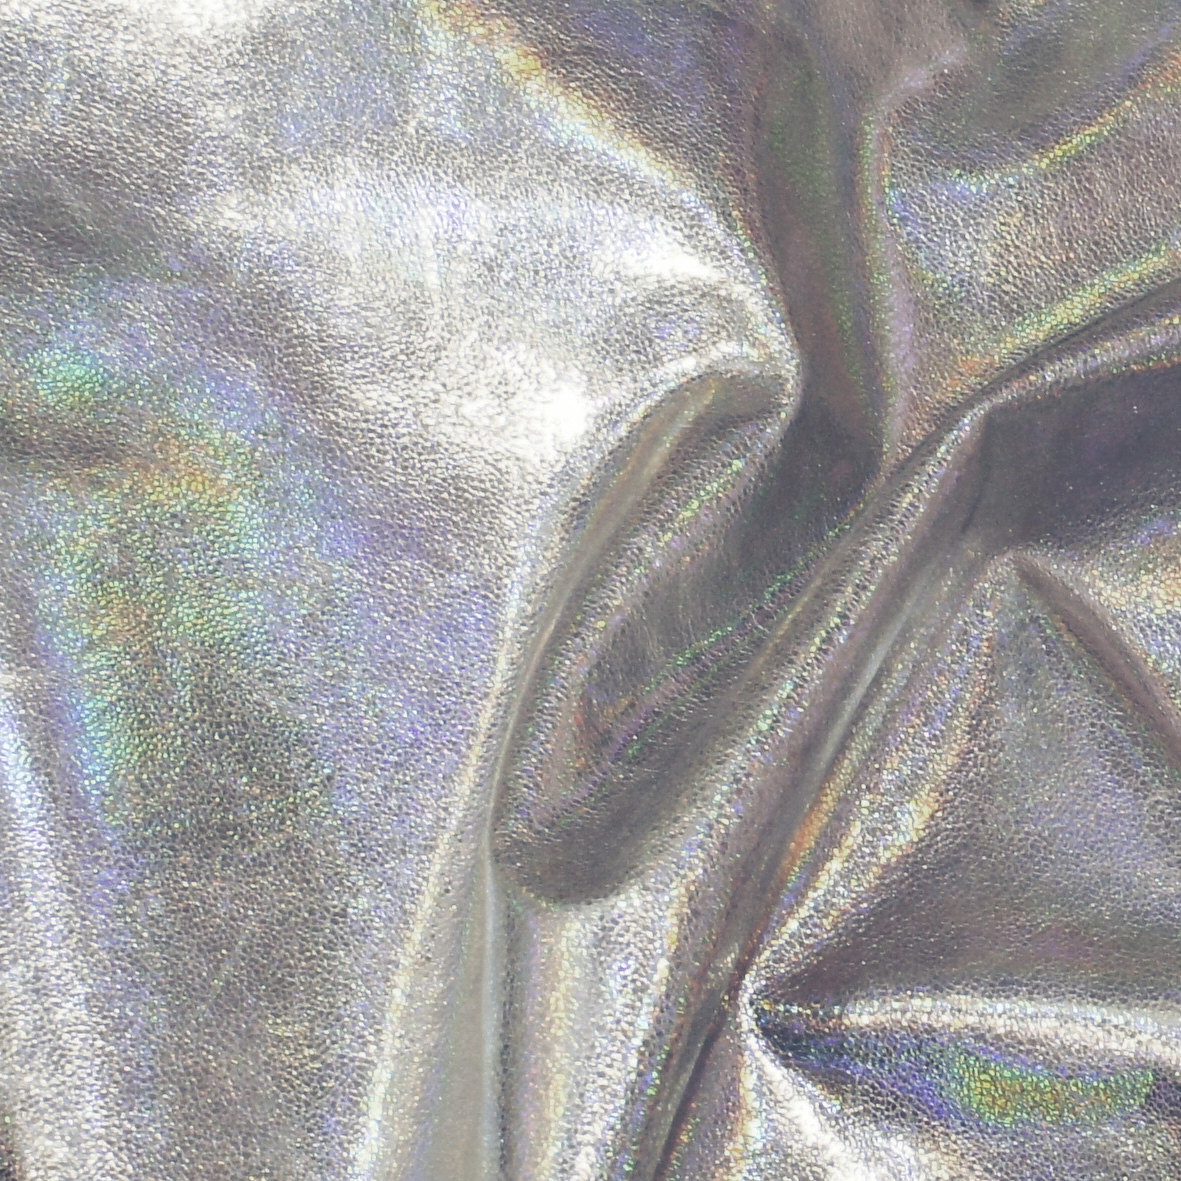 Holographic leather fabric from Etsy shop Leather & Ink